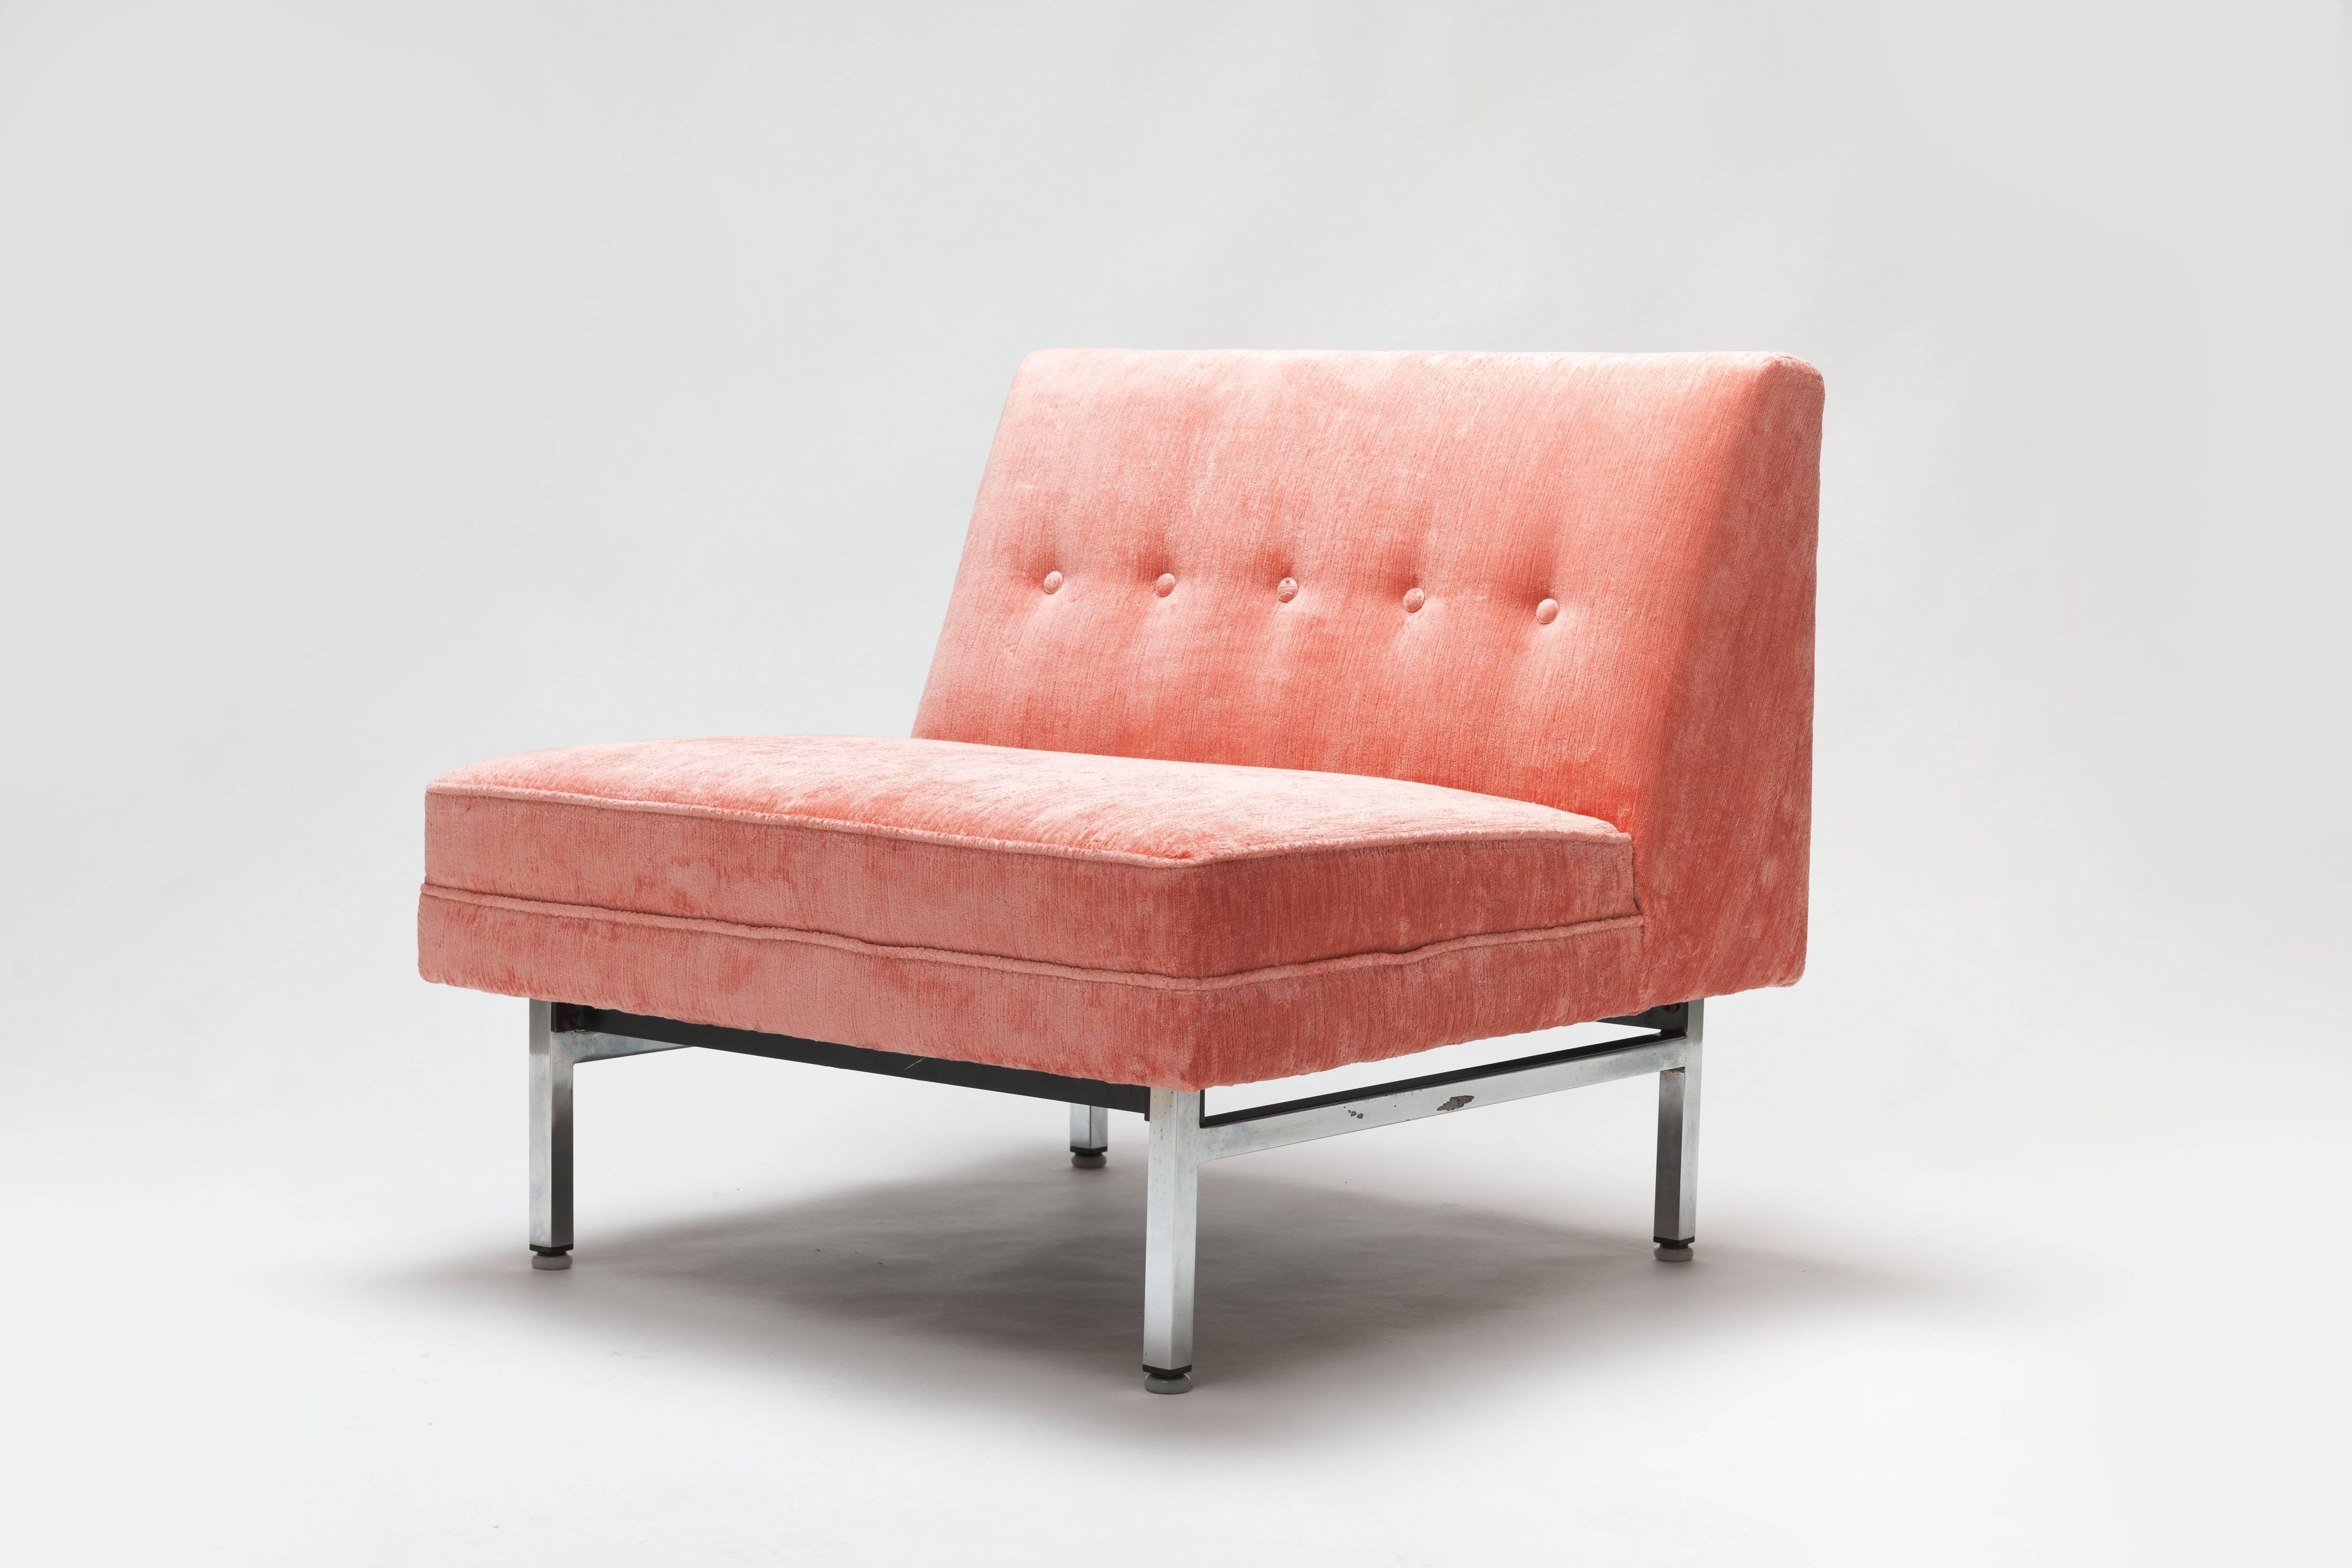 1956 modular seating series chair by George Nelson made by Herman Miller. Completely restored in a very beautiful and exclusive (expensive) French velvet fabric in distinct pink color.
The pink color changes by the way the light catches the fabric,